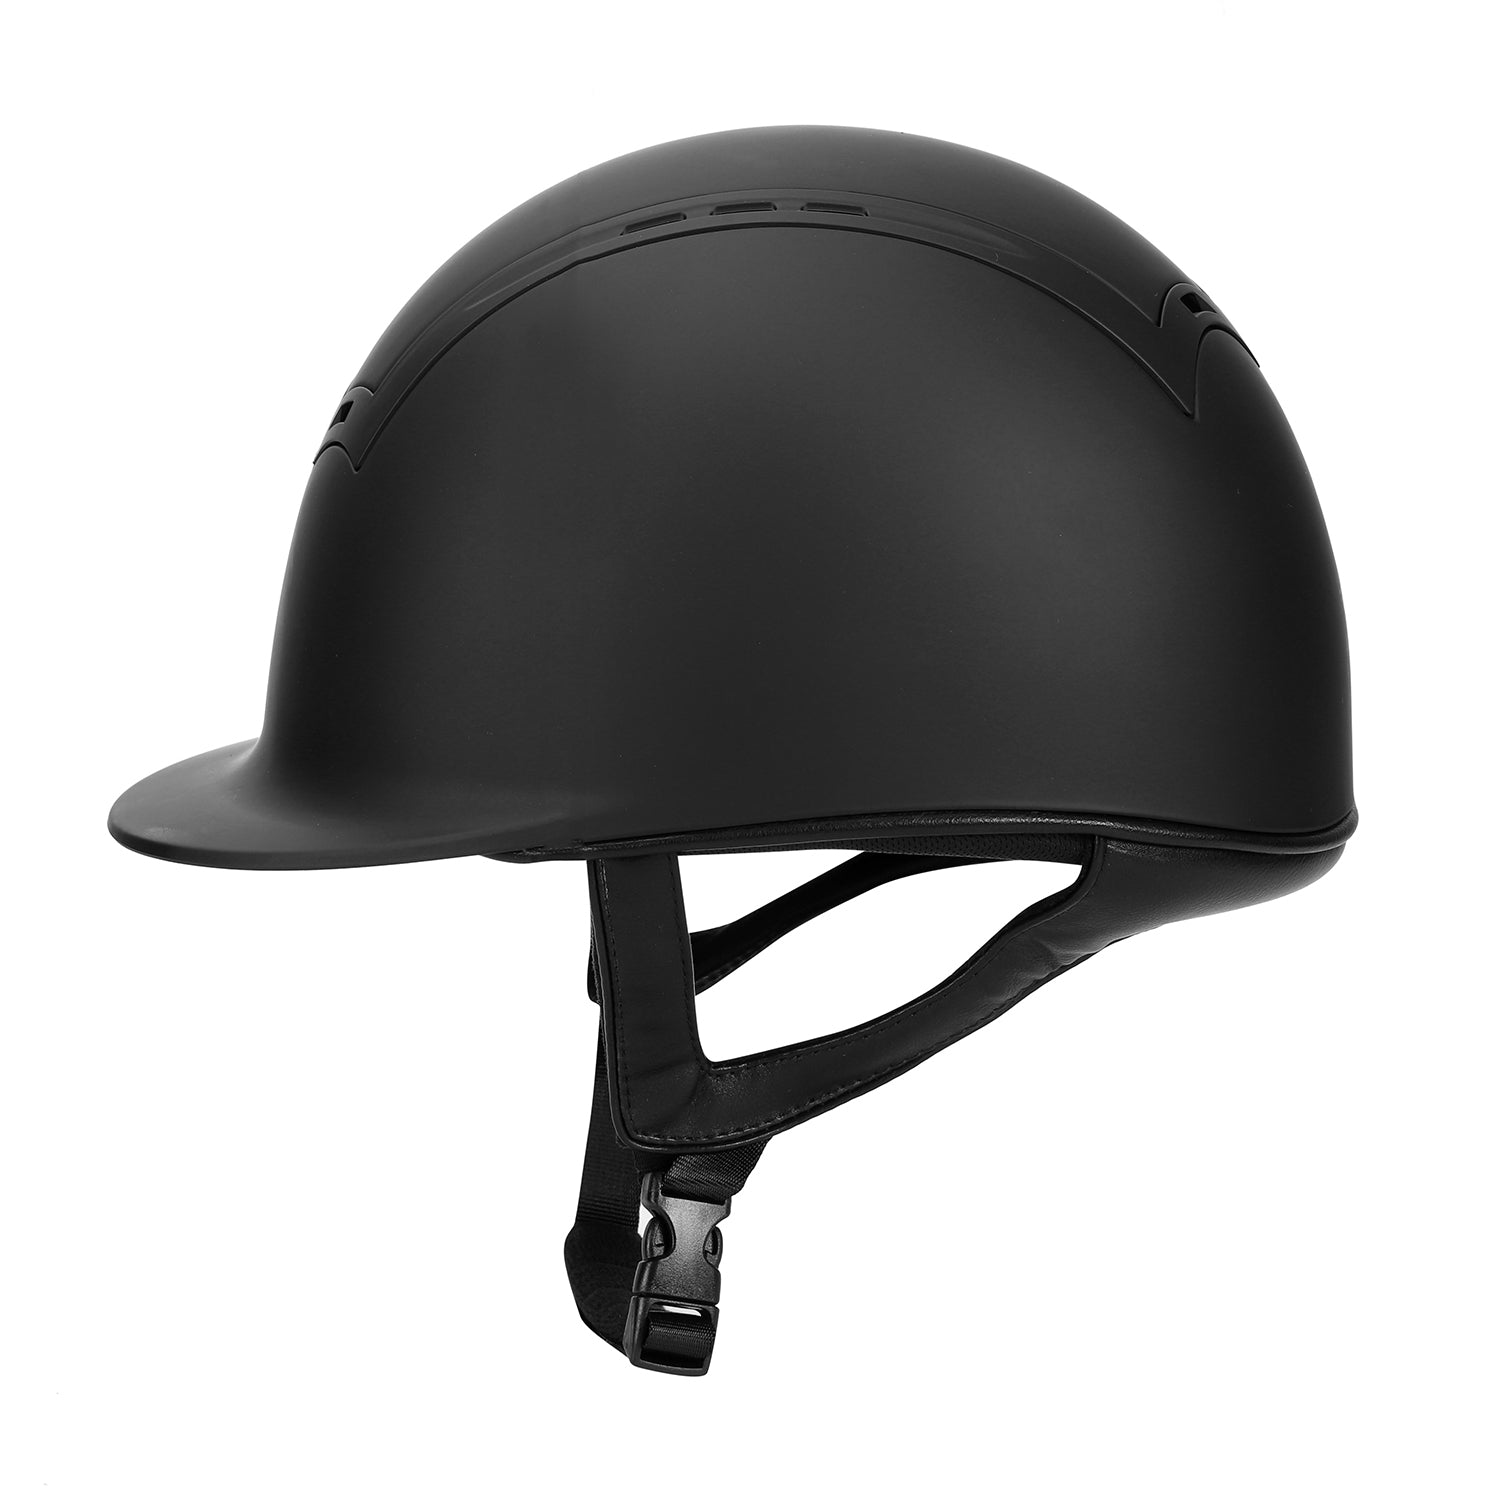 TuffRider Show Time Helmet|Protective Head Gear for Equestrian Riders - SEI Certified, Tough and Durable - Black&quot; - Breeches.com